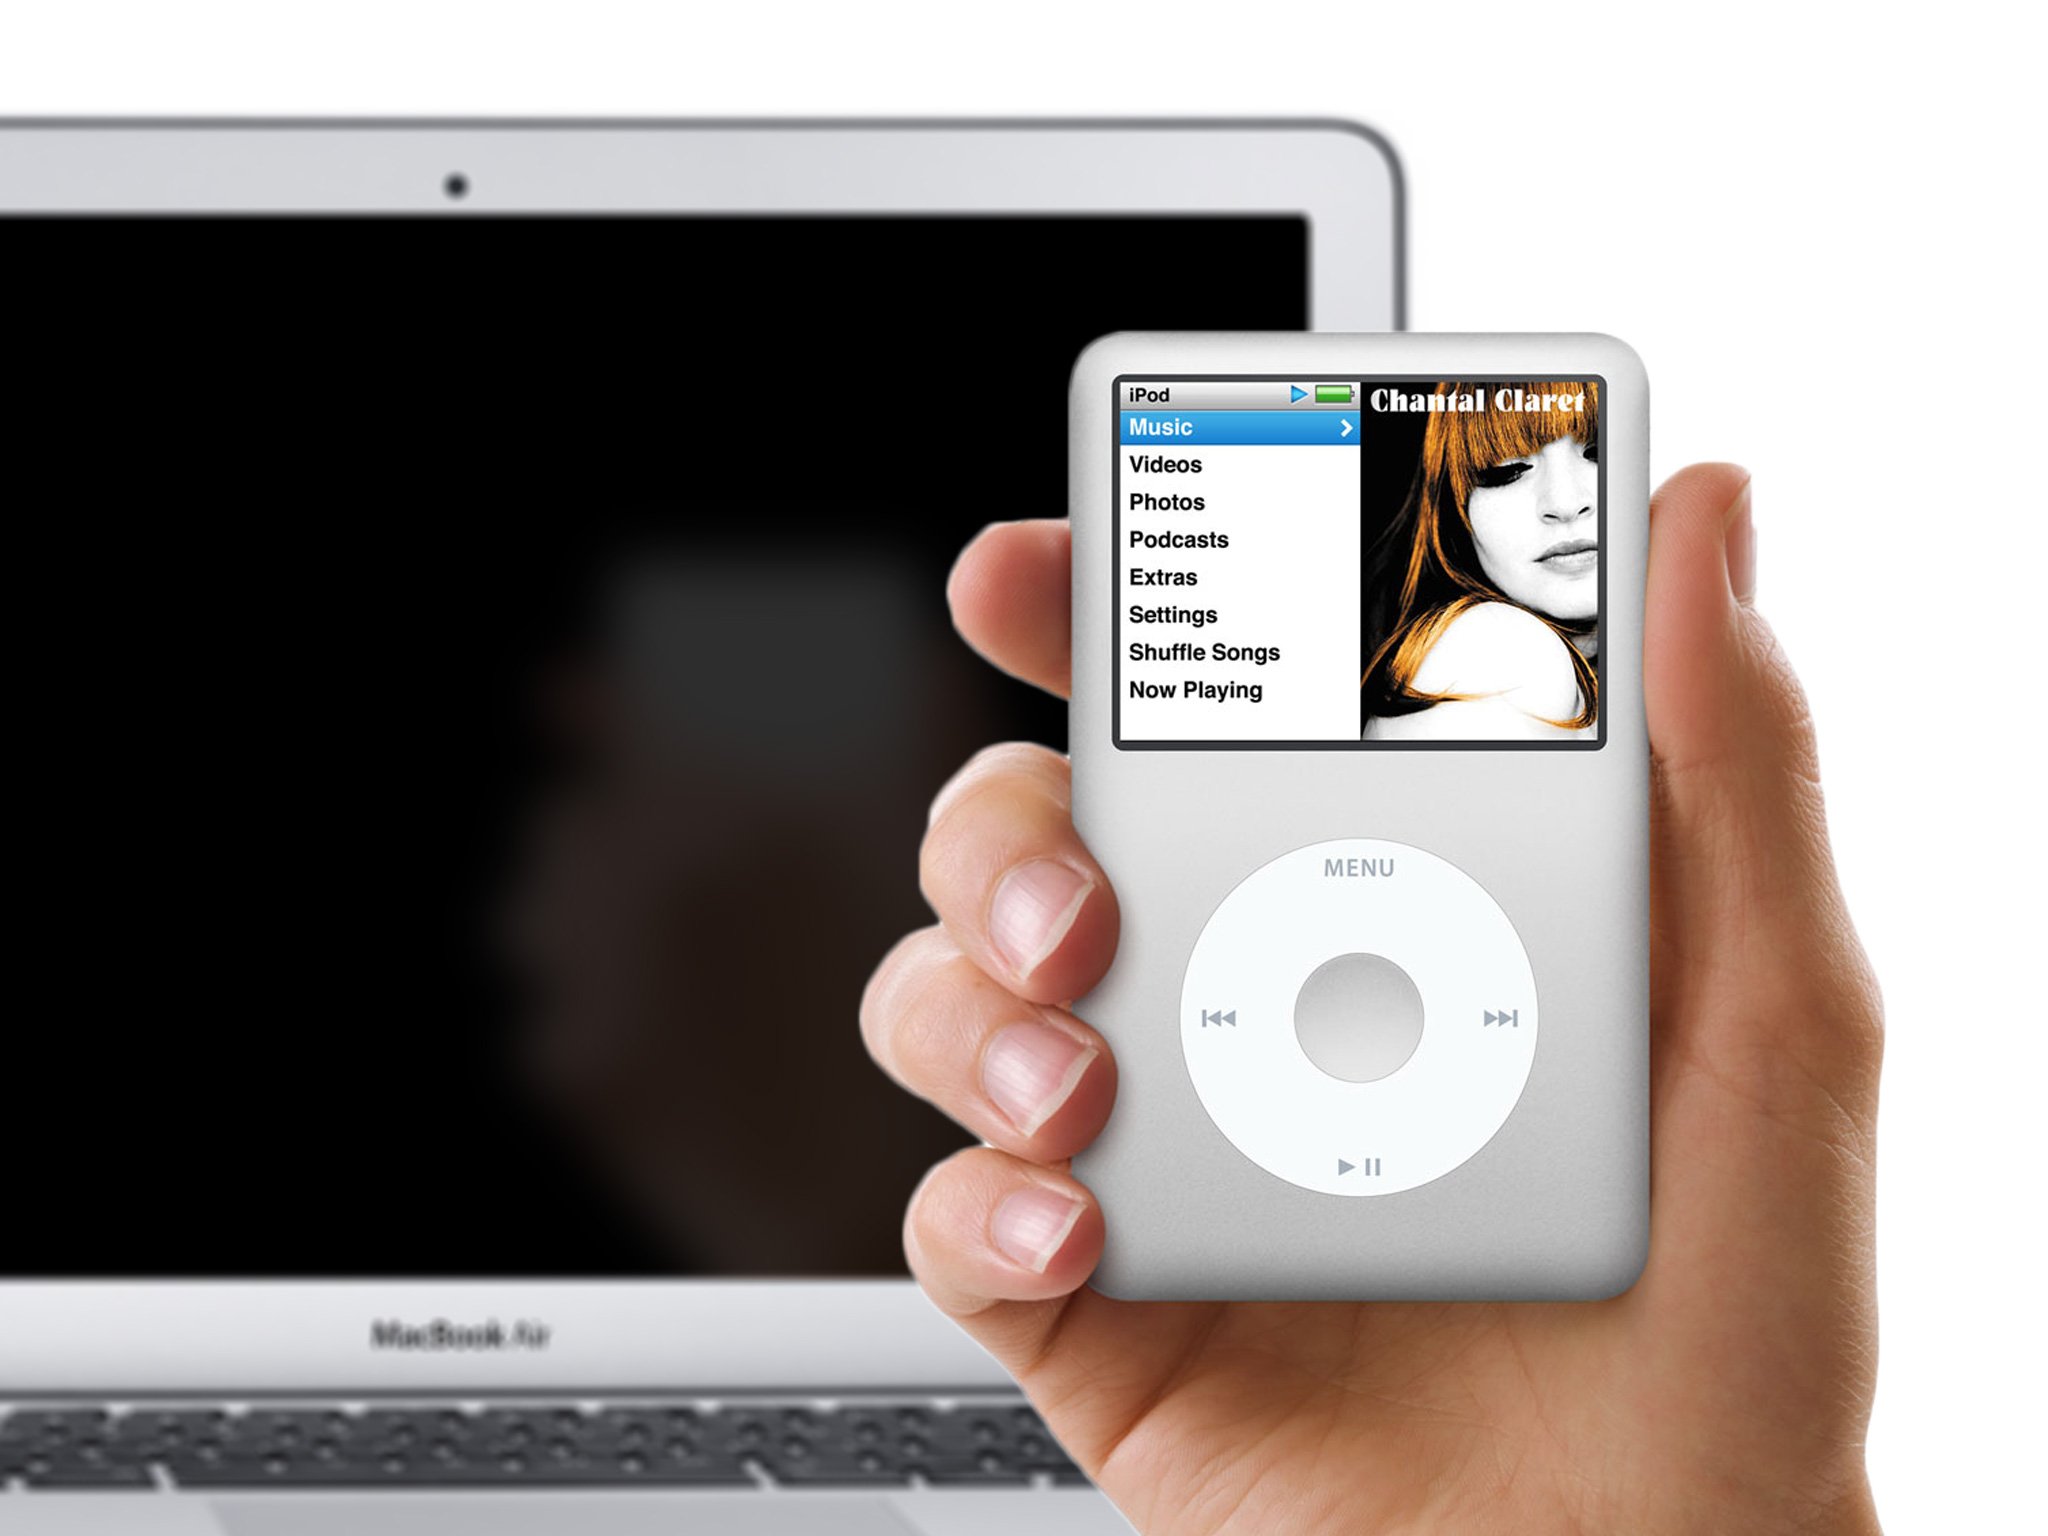 How to turn an old iPod classic into a new emergency boot drive for Mac